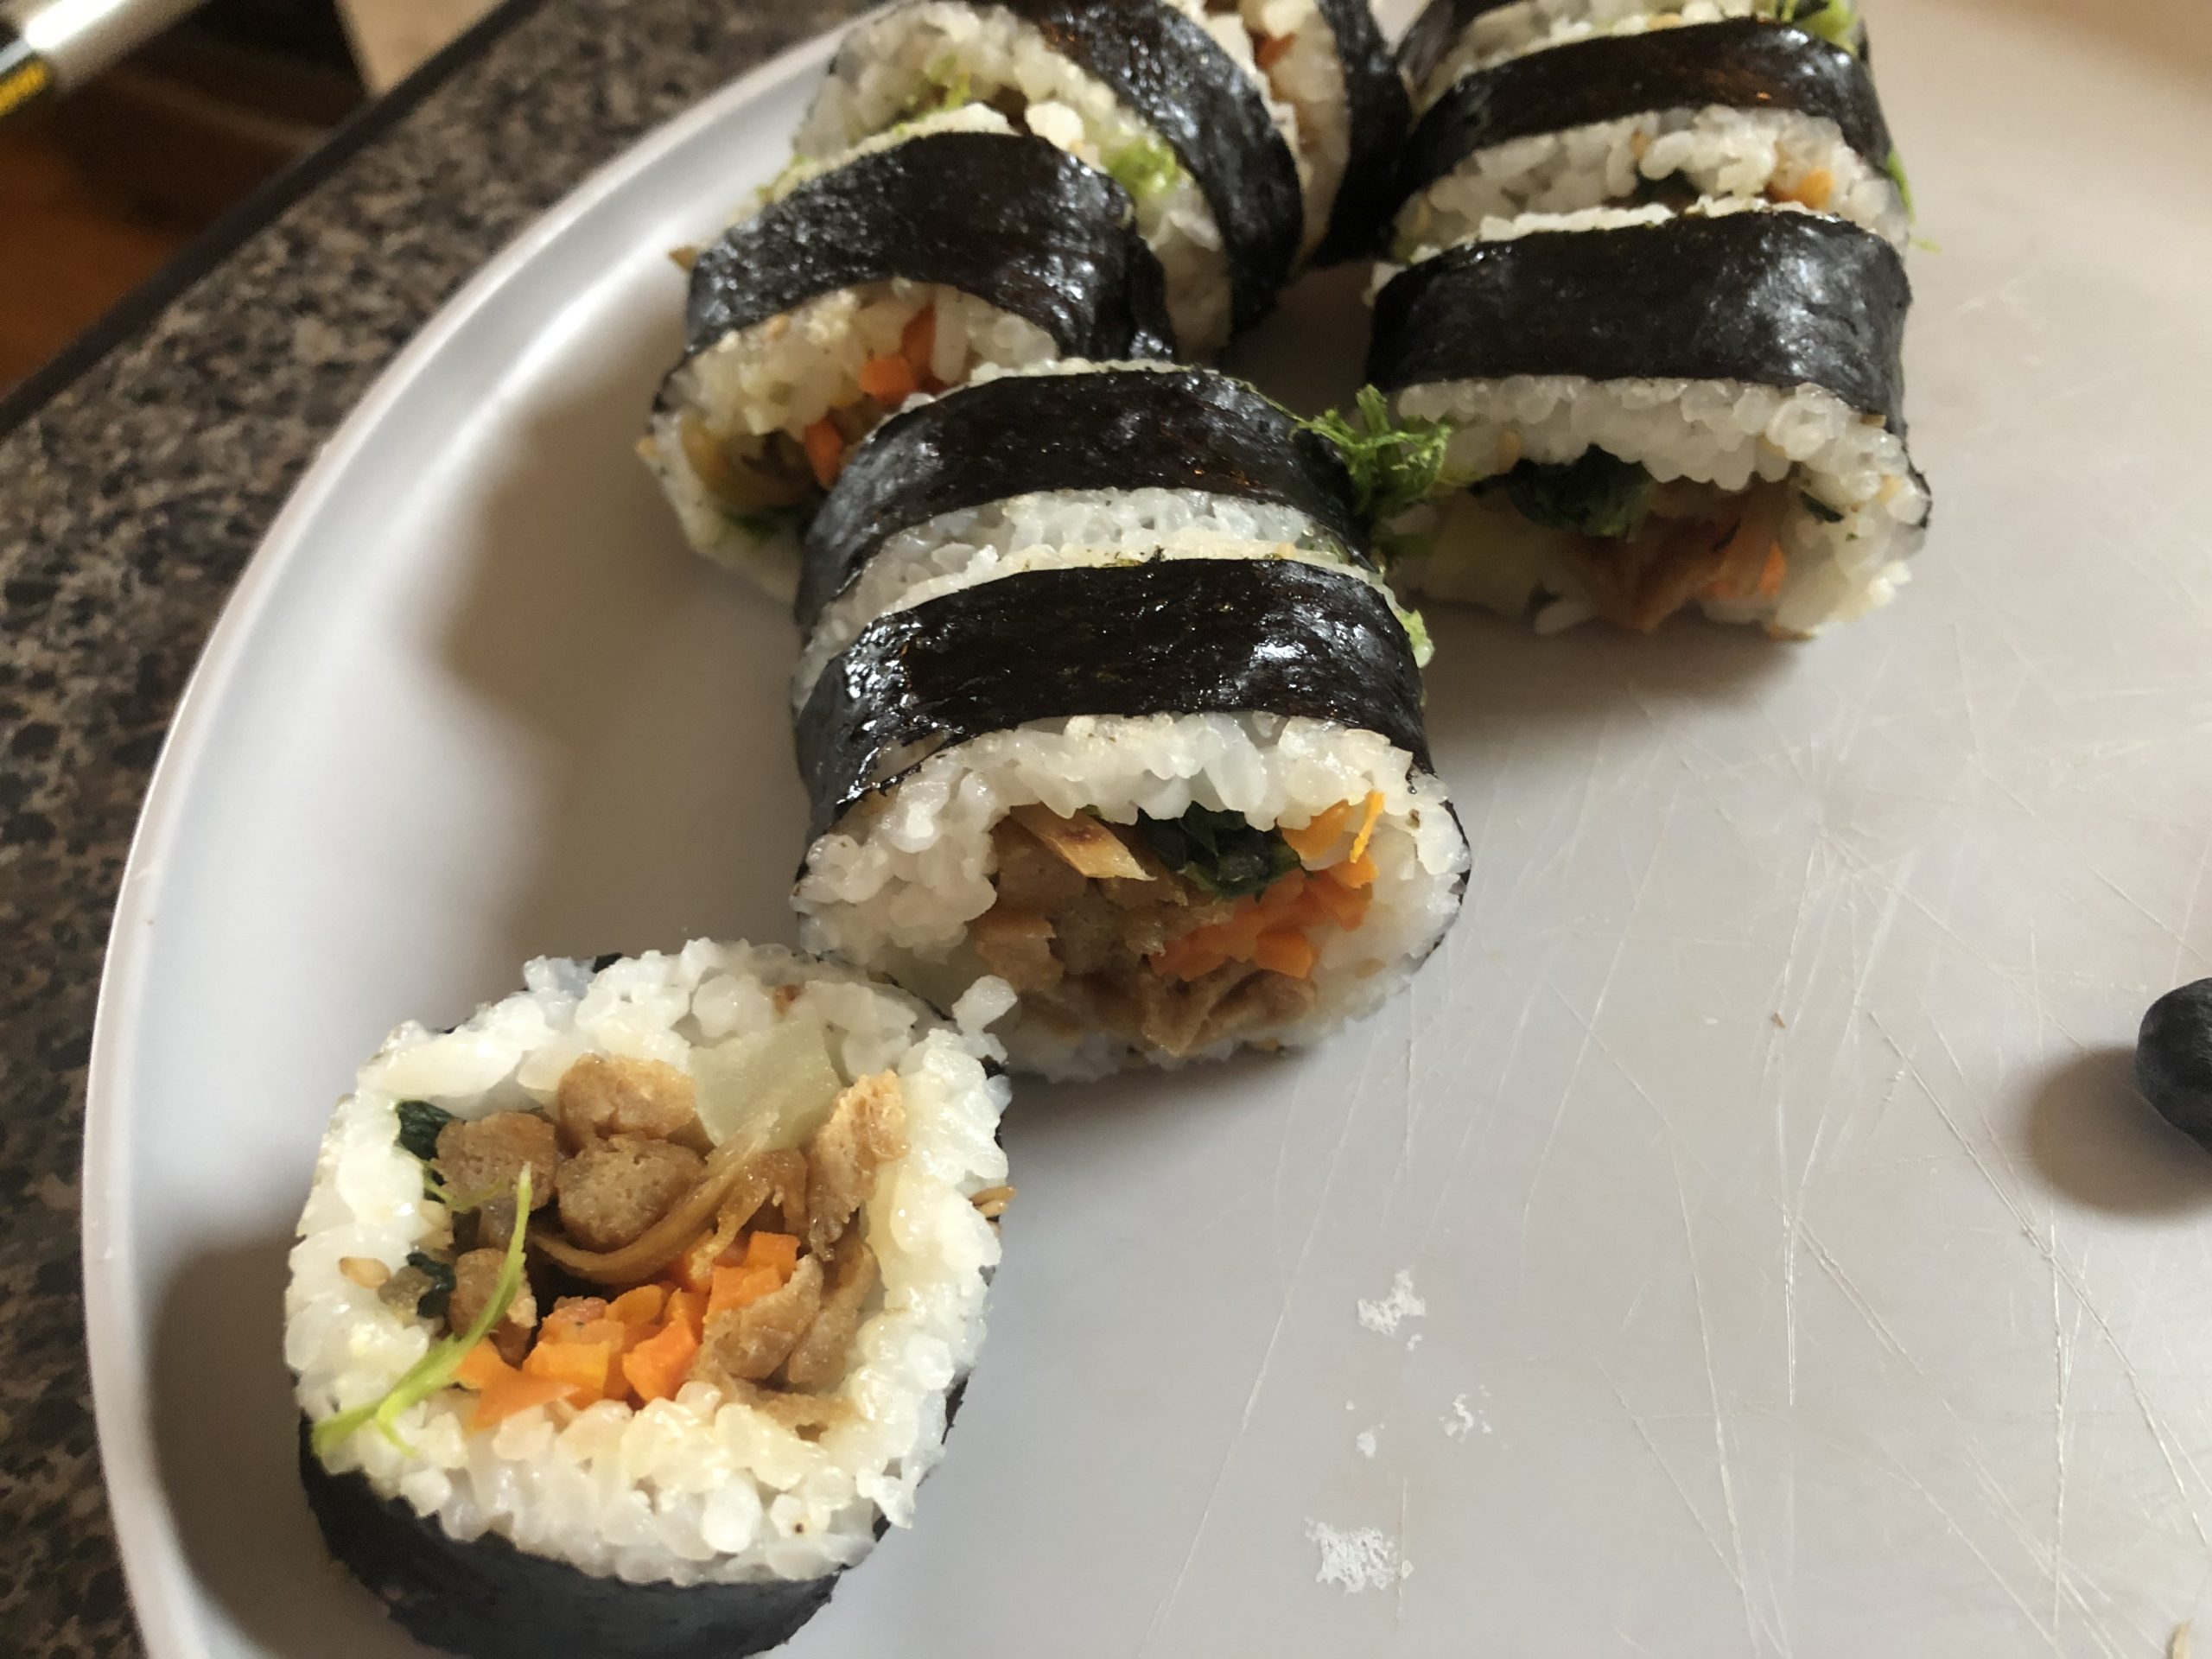 Costco Scores Big: New Bulk Kimbap Rolls Outshine Trader Joe’s, Offering More Bang for Your Buck